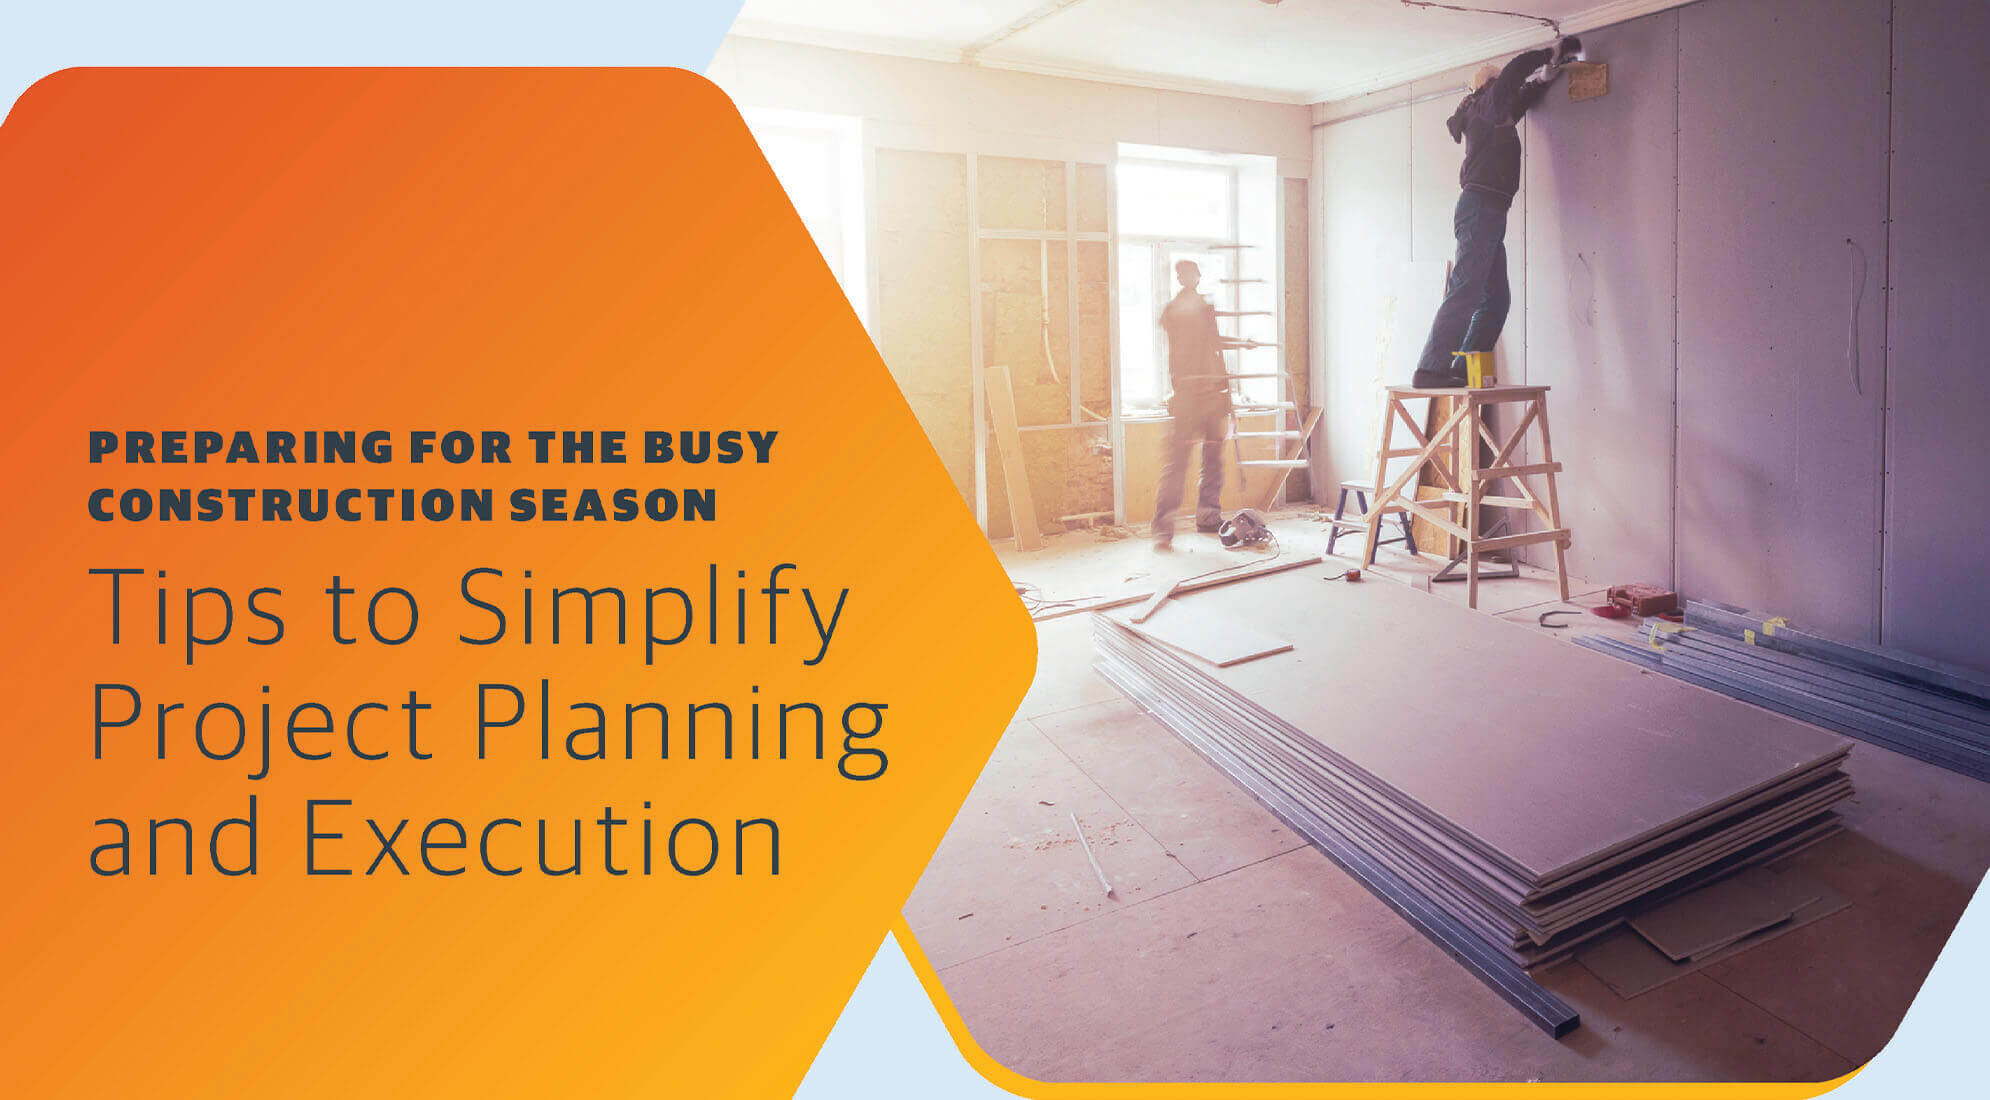 Tips to Simplify Construction Project Planning and Execution 2